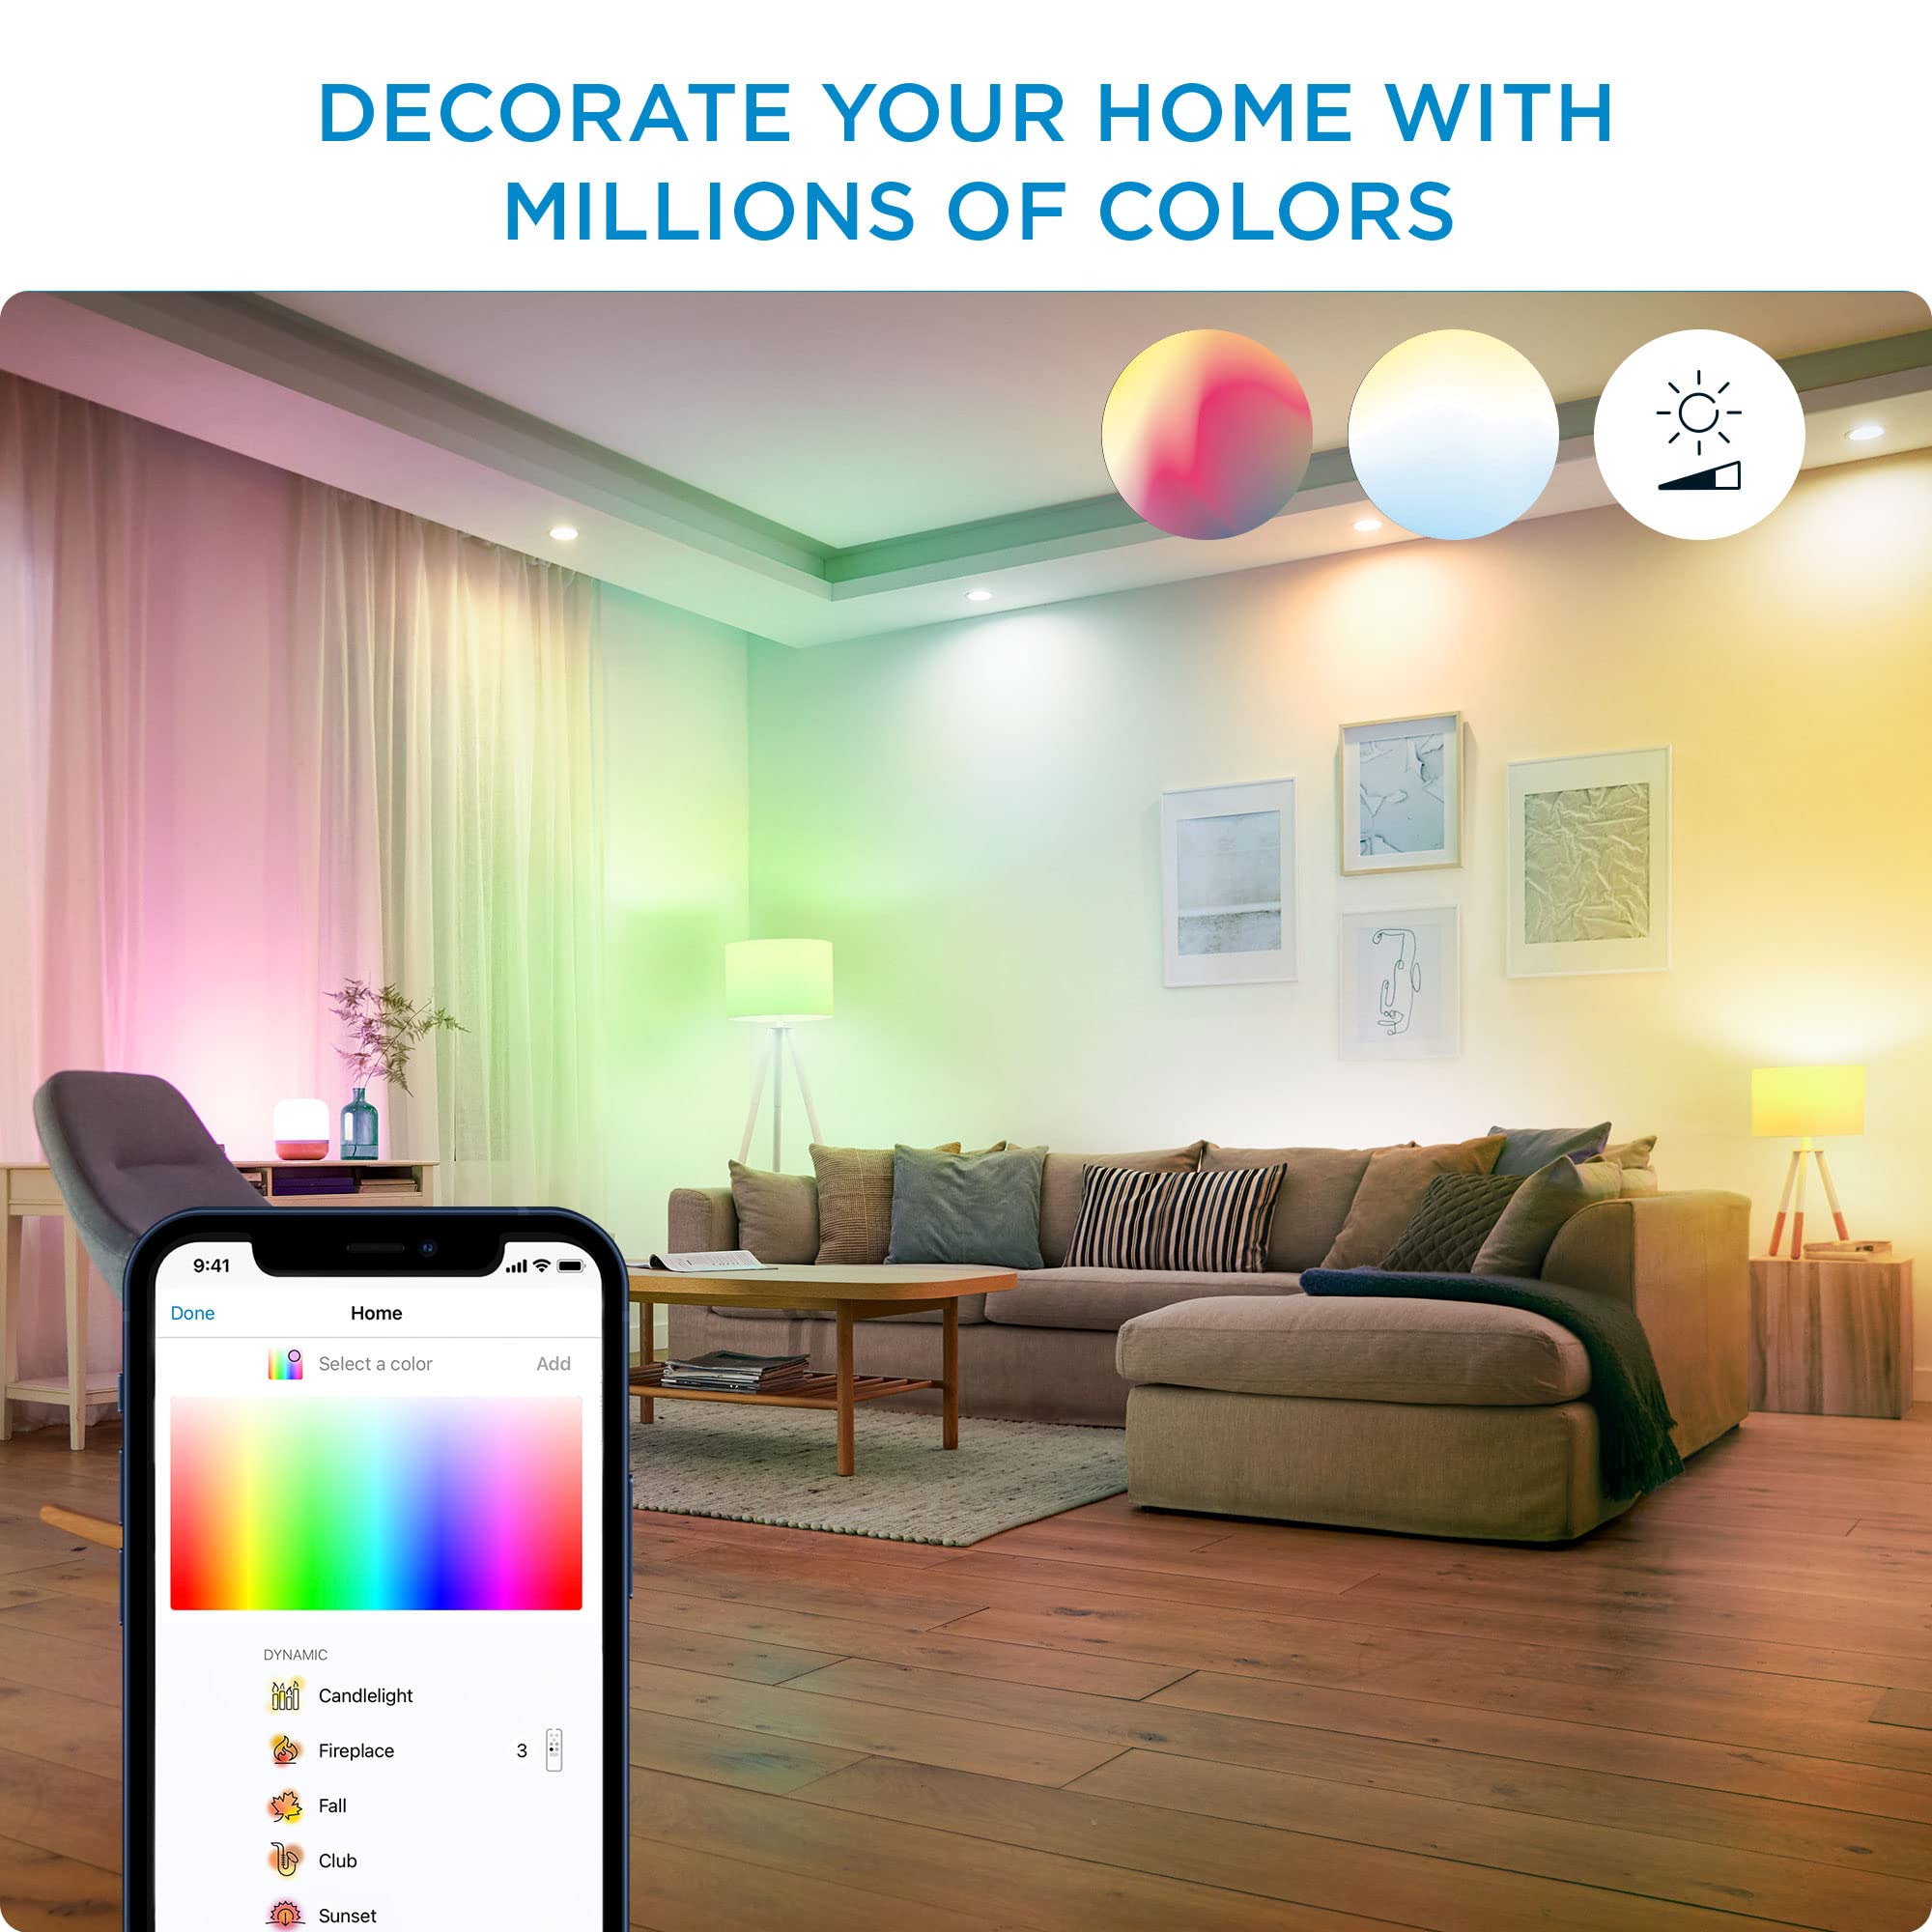 WiZ Full Color and Warm White Wi-Fi LED Light Strip 2M+2M with plug, Smart Control With Wiz App, Compatible with Alexa, Google Assistant, Siri Shortcuts, and Matter, Connects To Wi-Fi, No Hub Required